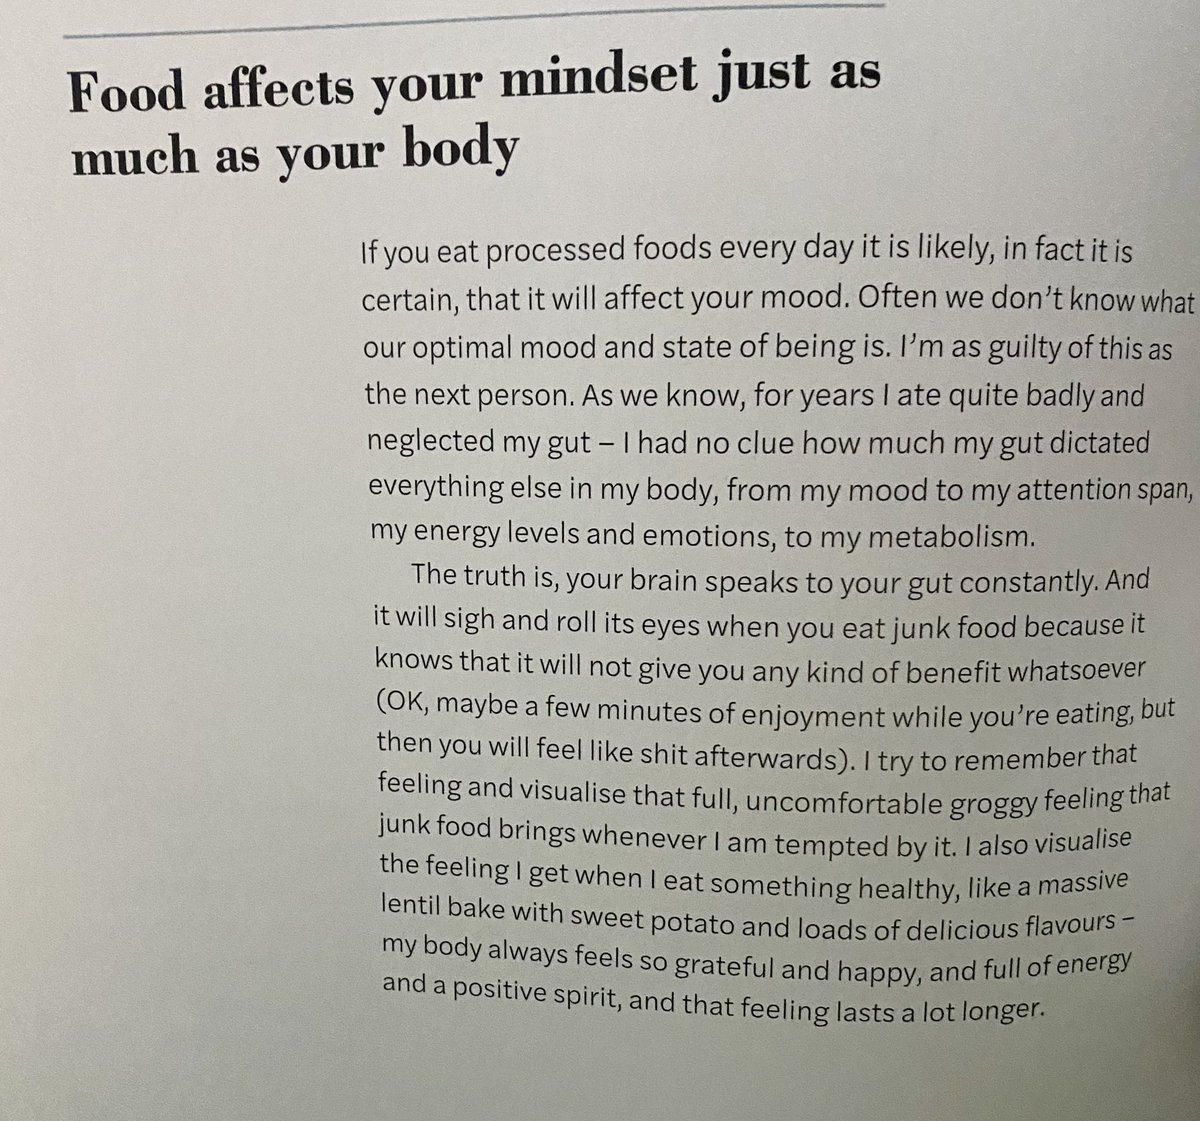 Since it is #NEDAWeek, it’s a great time to bring back some parts of Ellie’s incredible book #FitterCalmerStronger to remind everyone how important a healthy relationship with food is but at the same time that it is okay if you’re struggling and that one day it’ll get better x